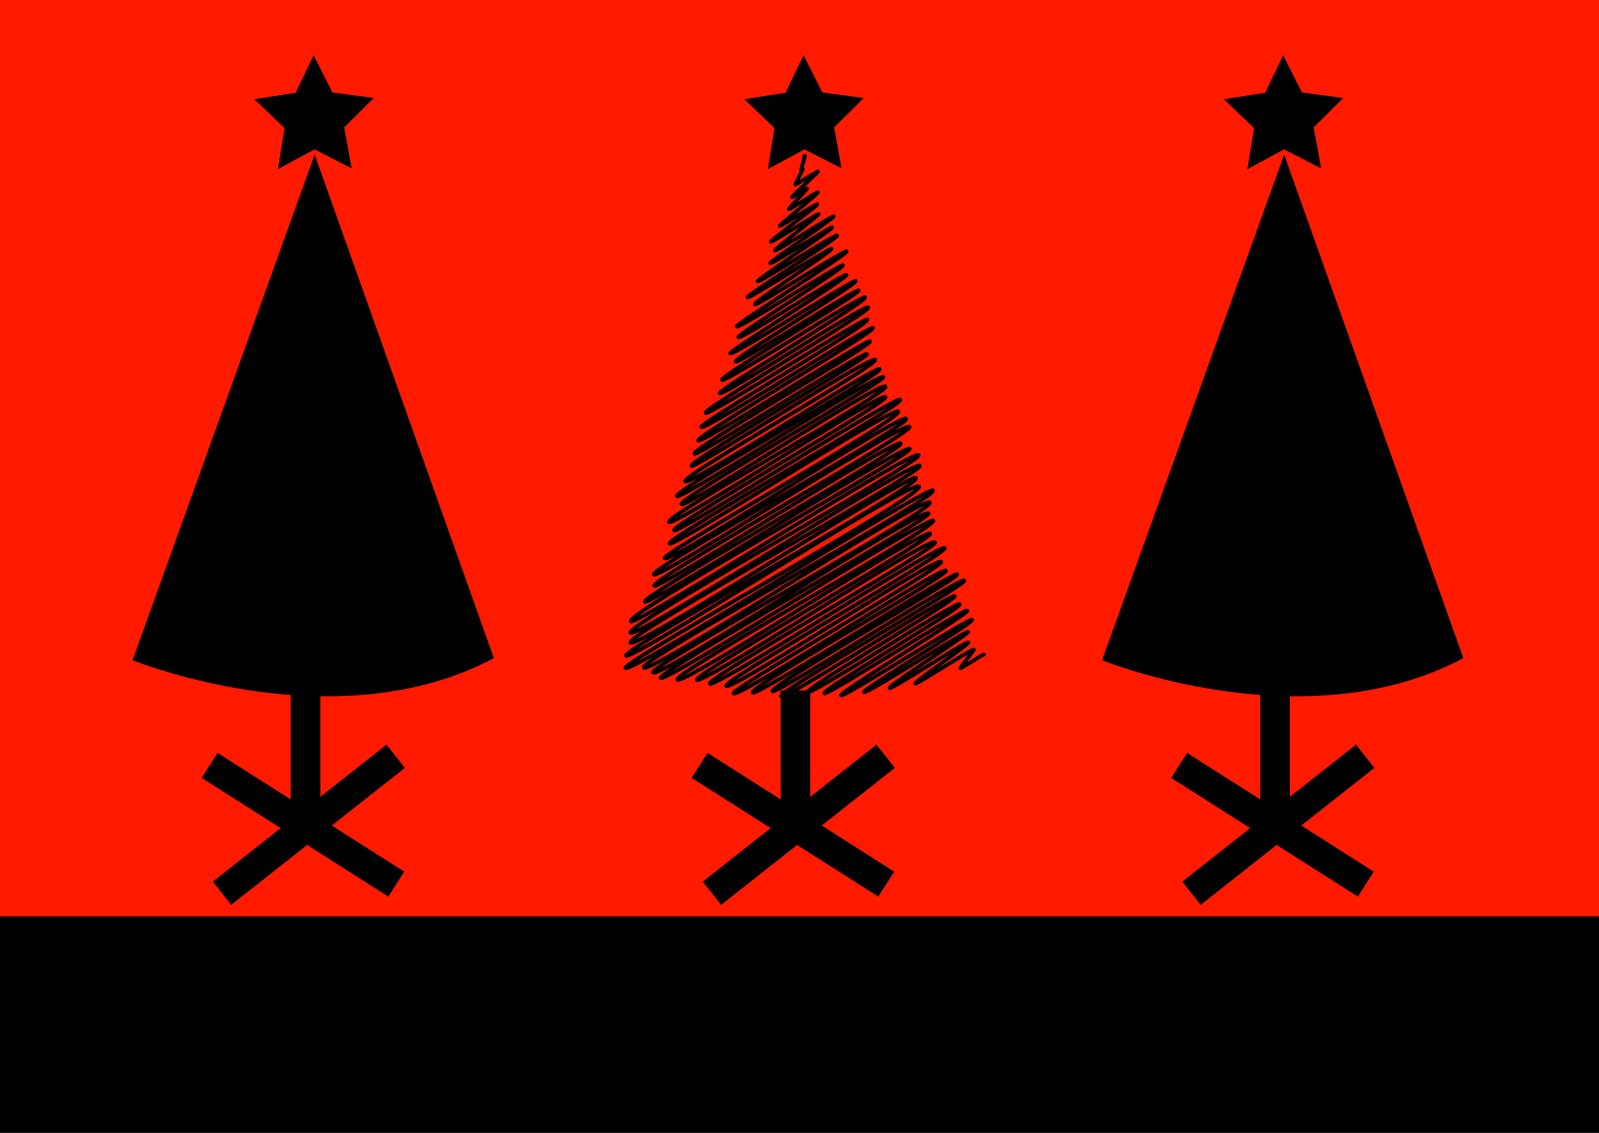 three black trees on red and black background